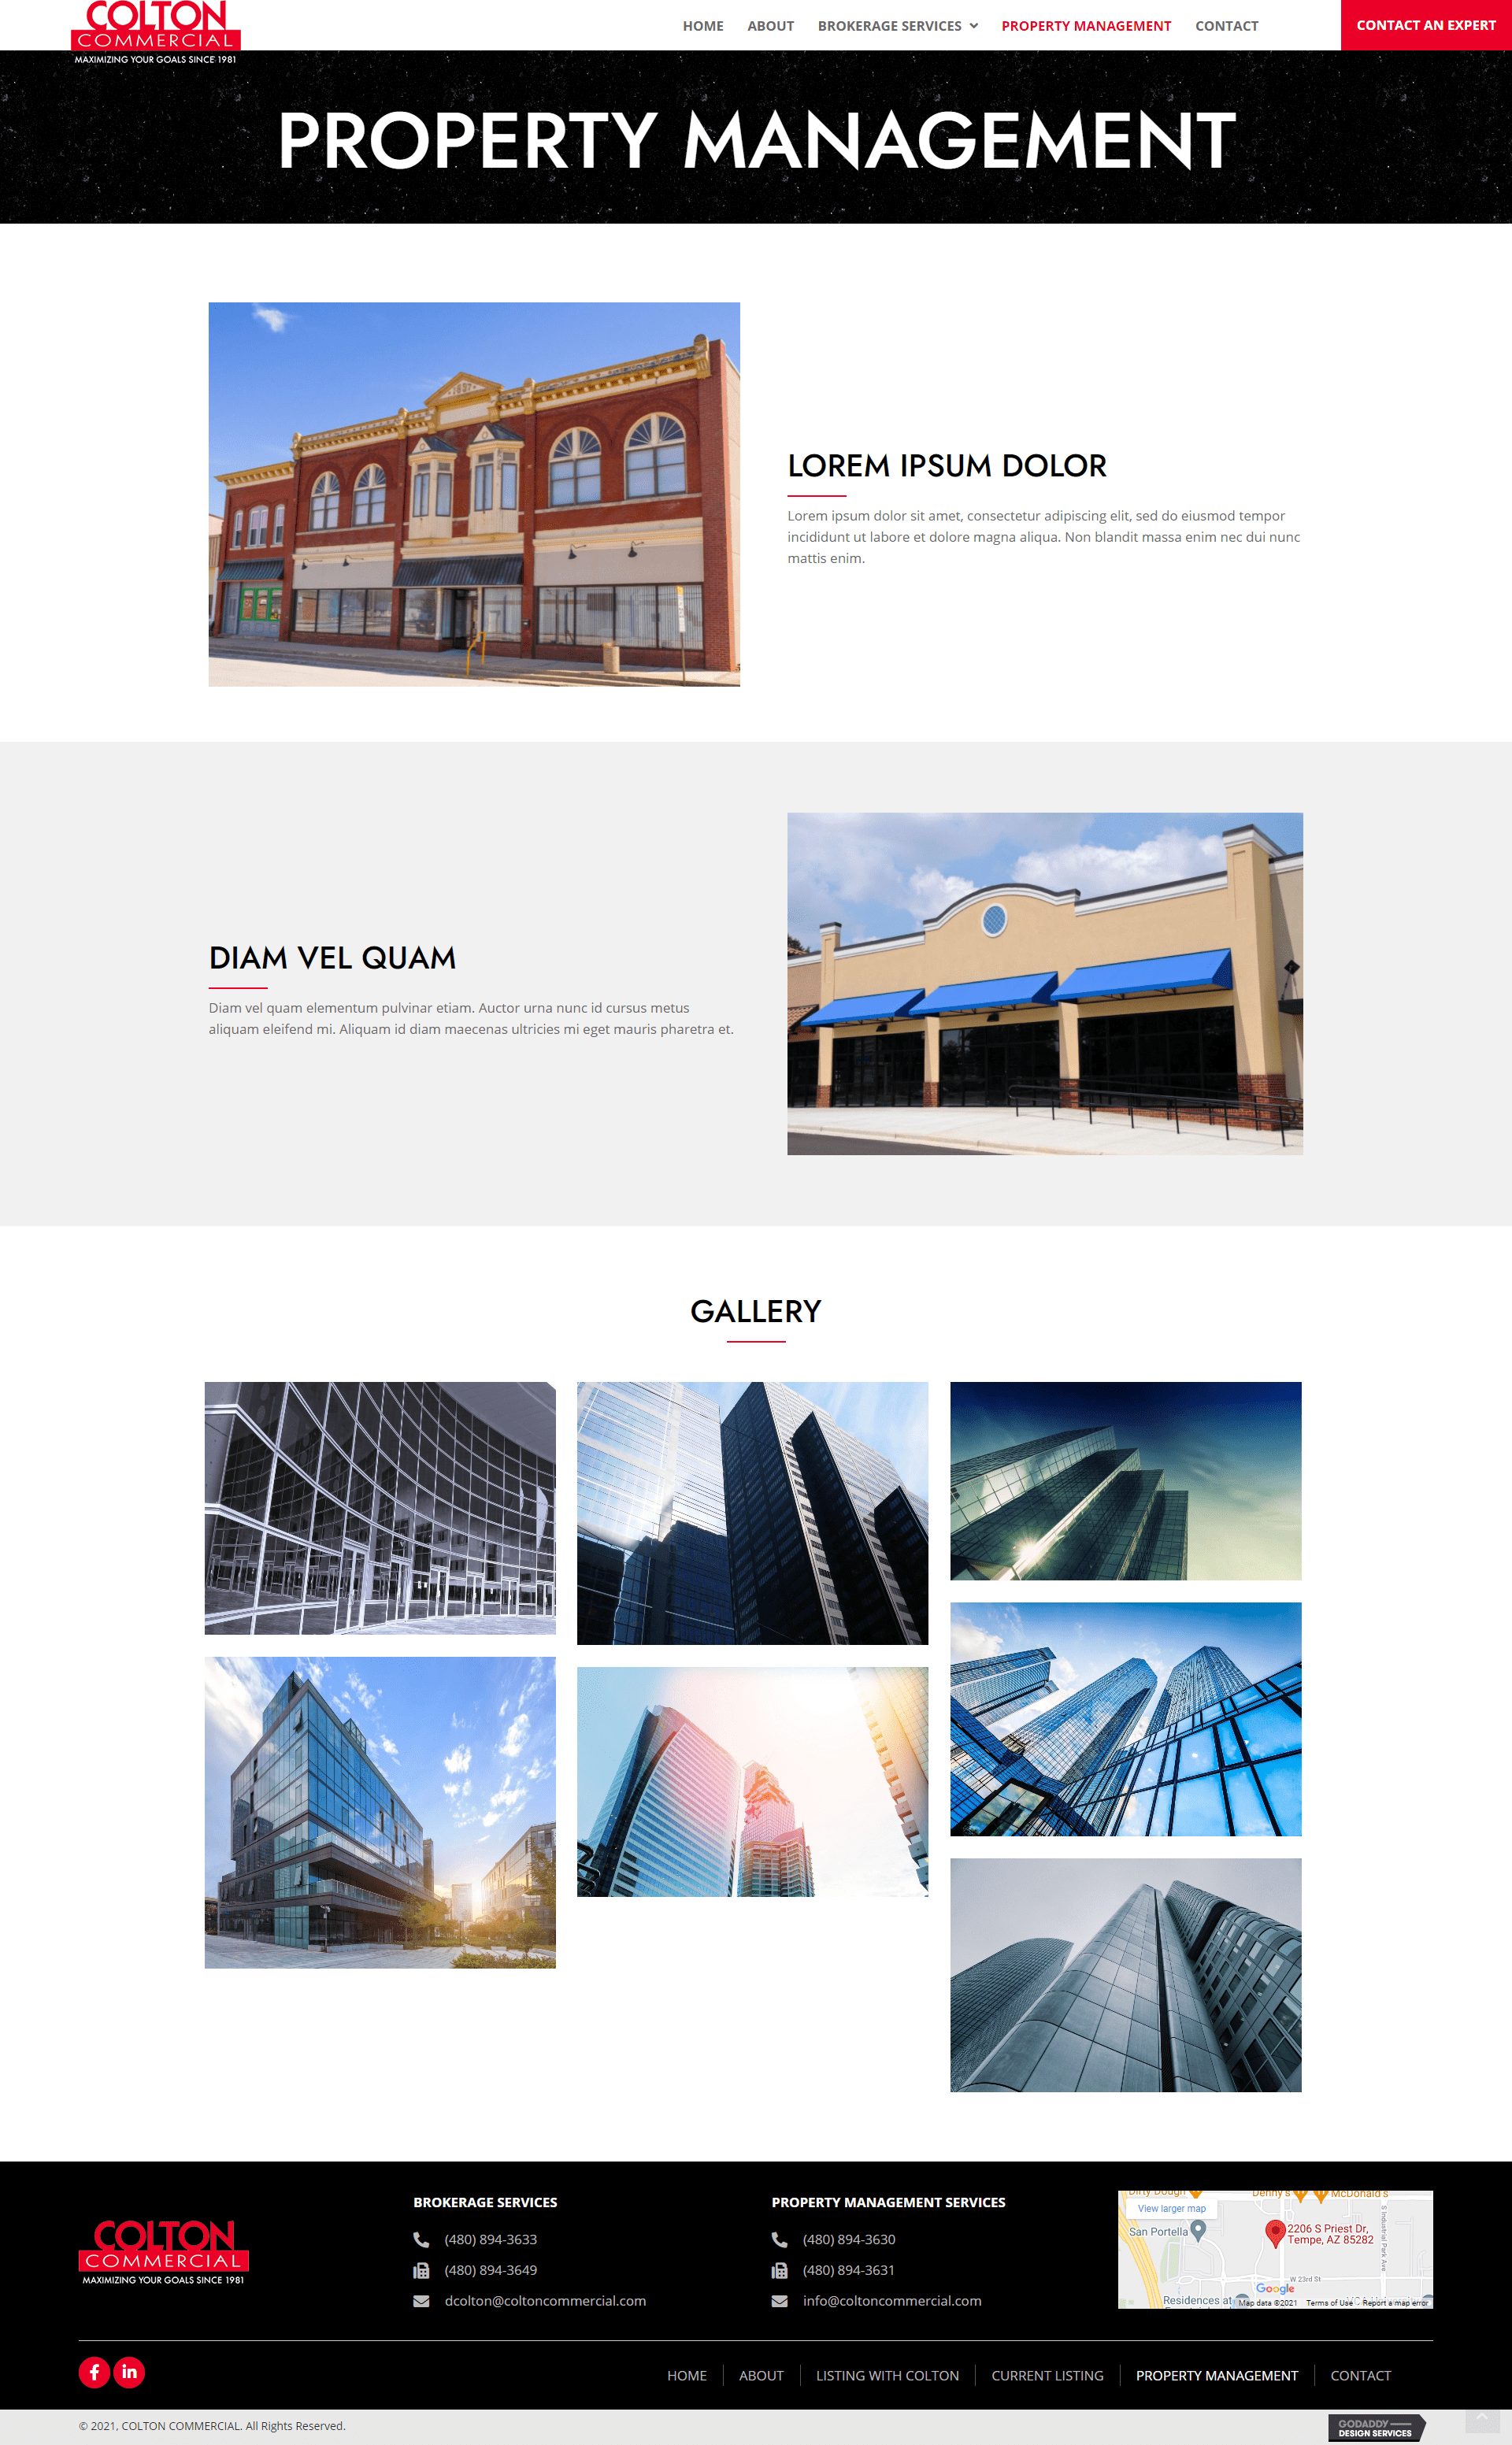 COLTON COMMERCIAL Propery page